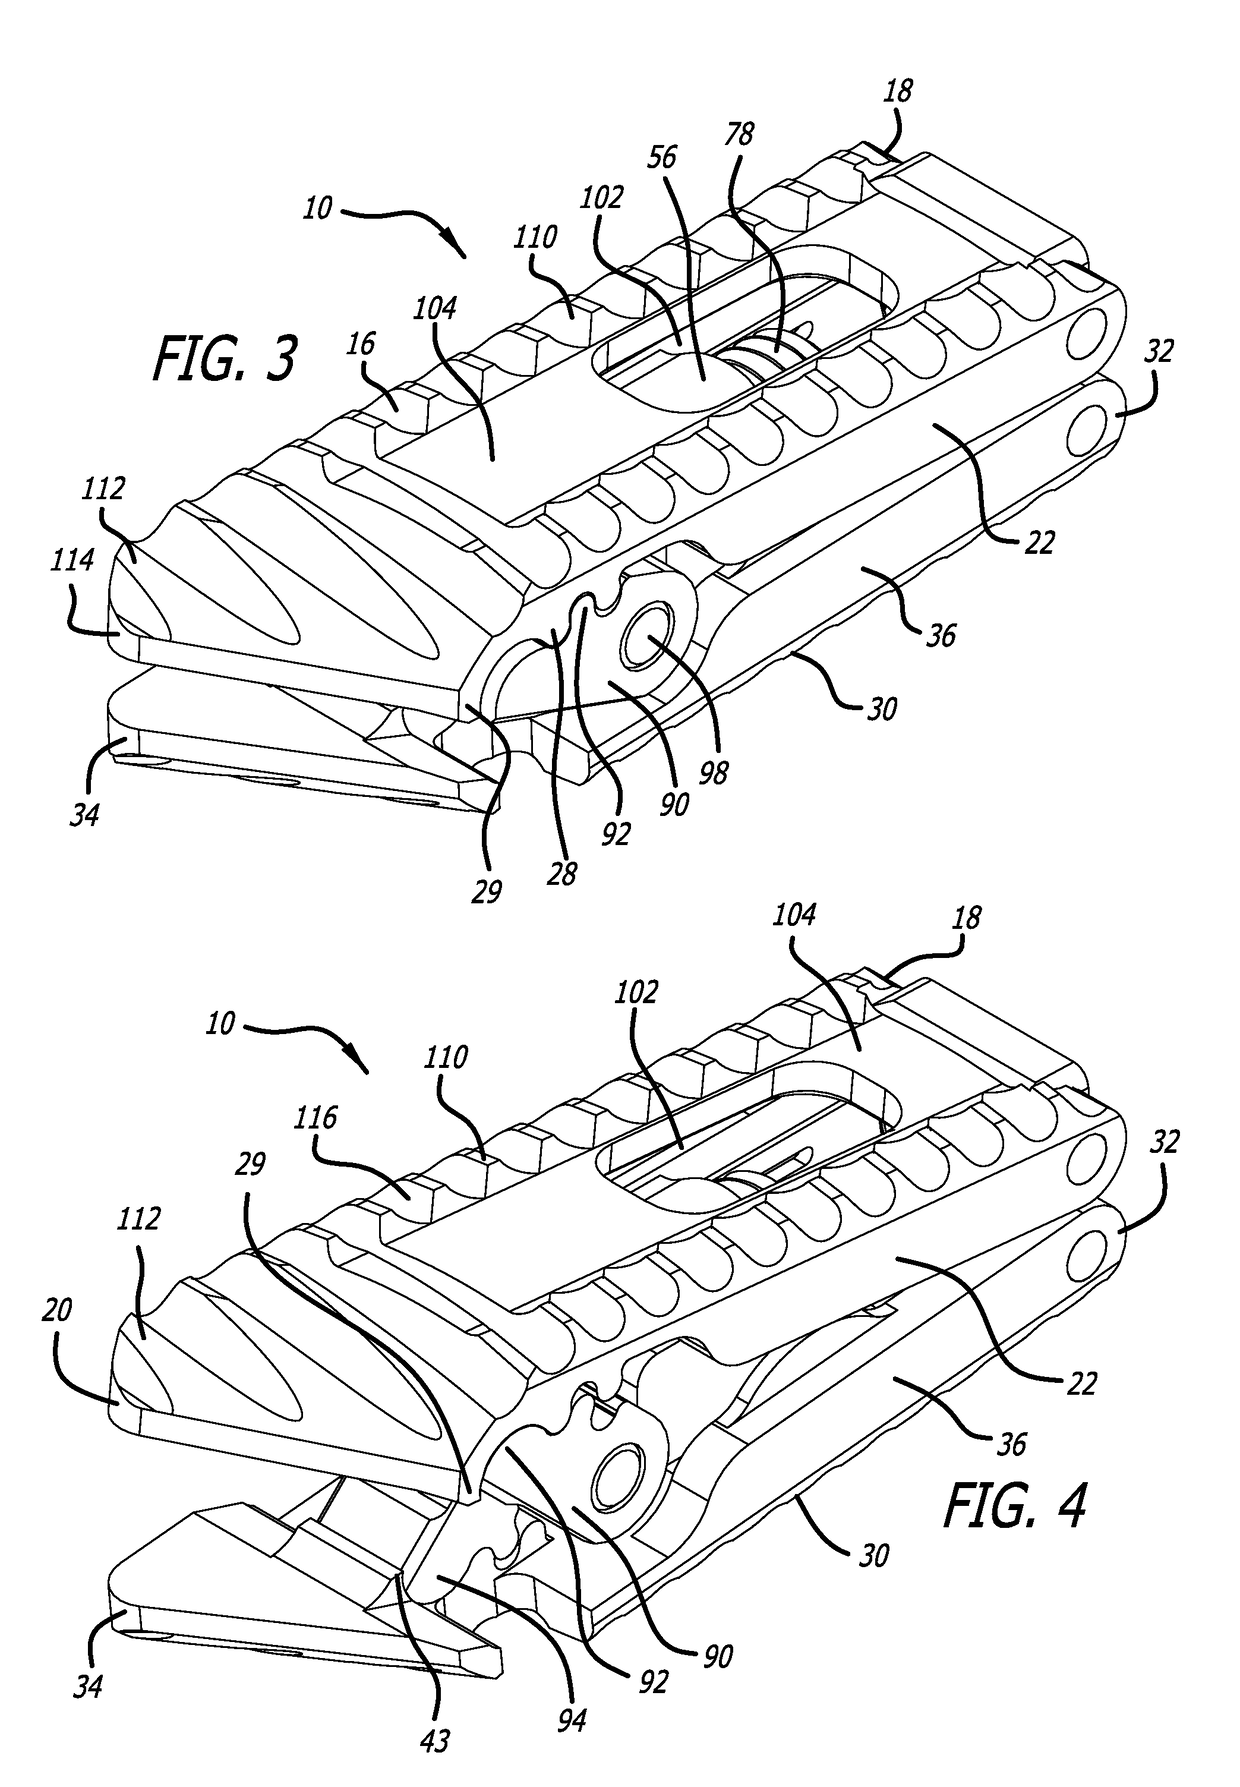 Geared cam expandable interbody implant and method of implanting same